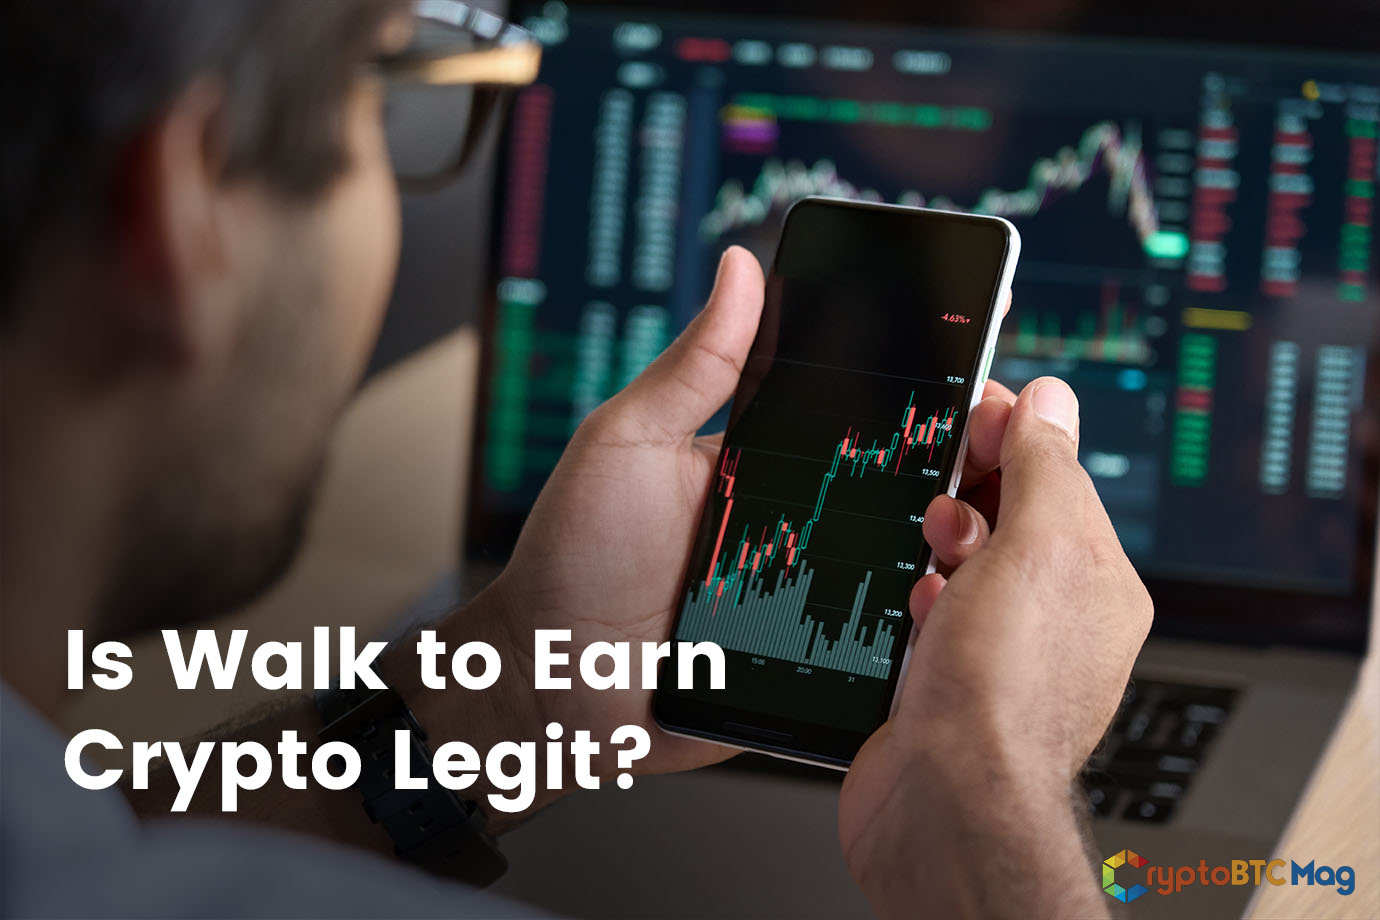 New Way To Earn Cryptocurrency